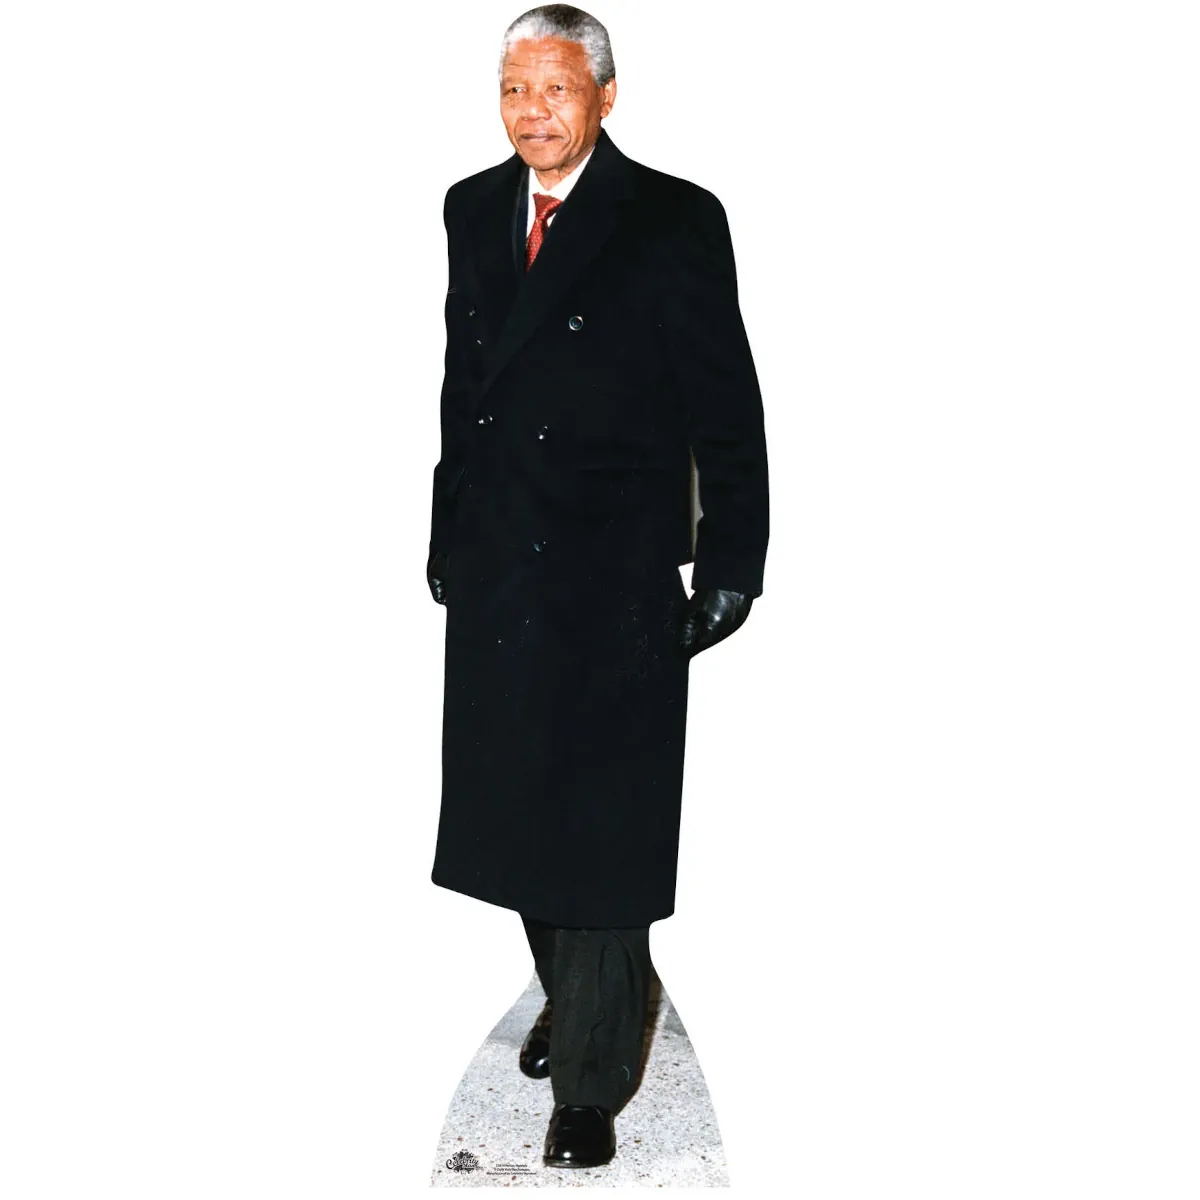 CS614 Nelson Mandela (Former President of South Africa) Lifesize Cardboard Cutout Standee Front